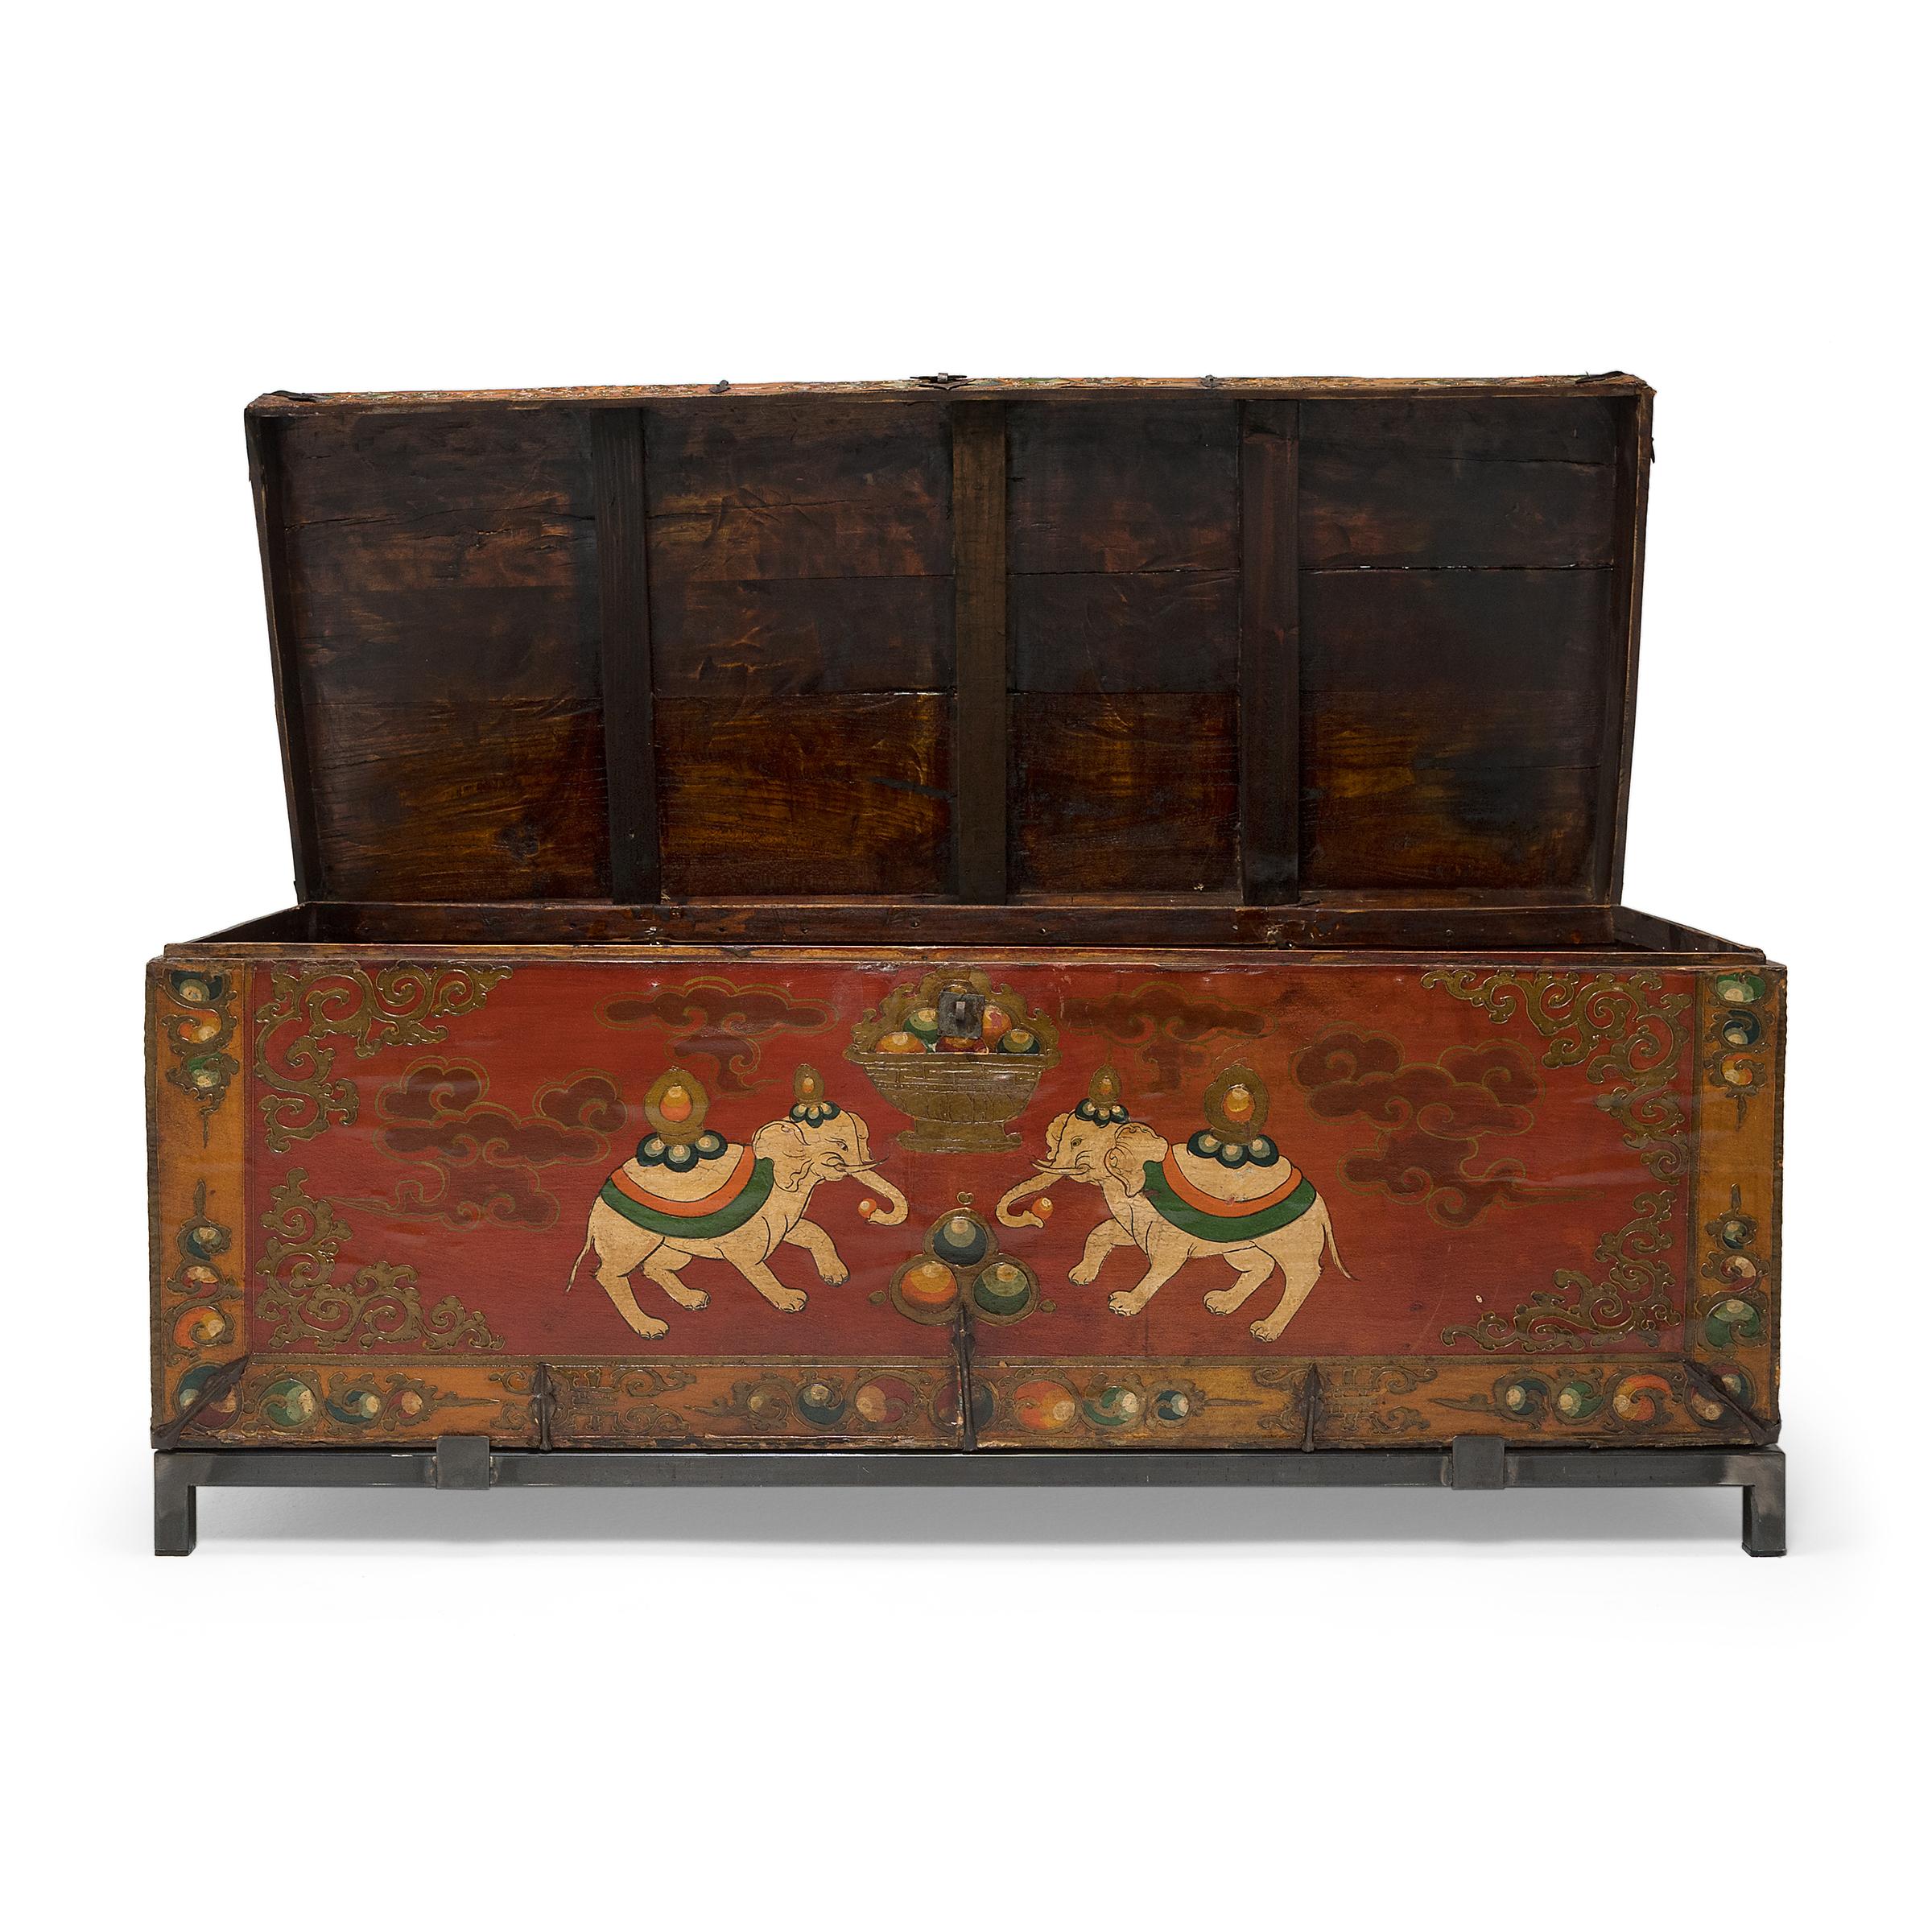 Teak Chinese Painted Elephant Trunk Table, C. 1900 For Sale